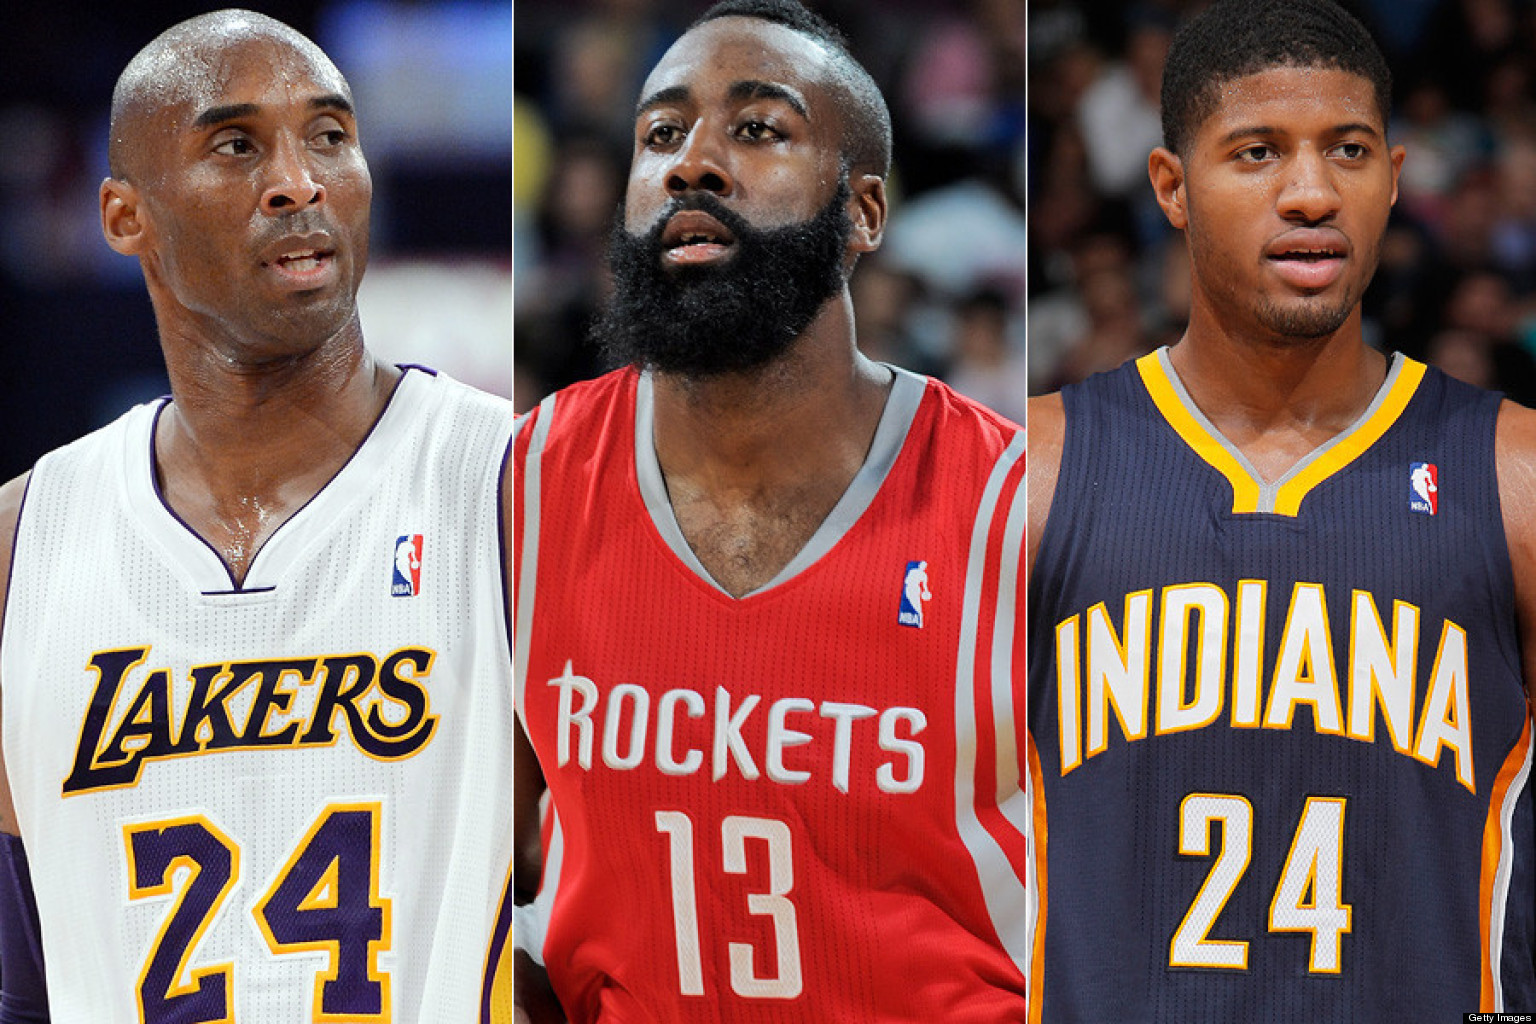 the best shooting guards in the nba